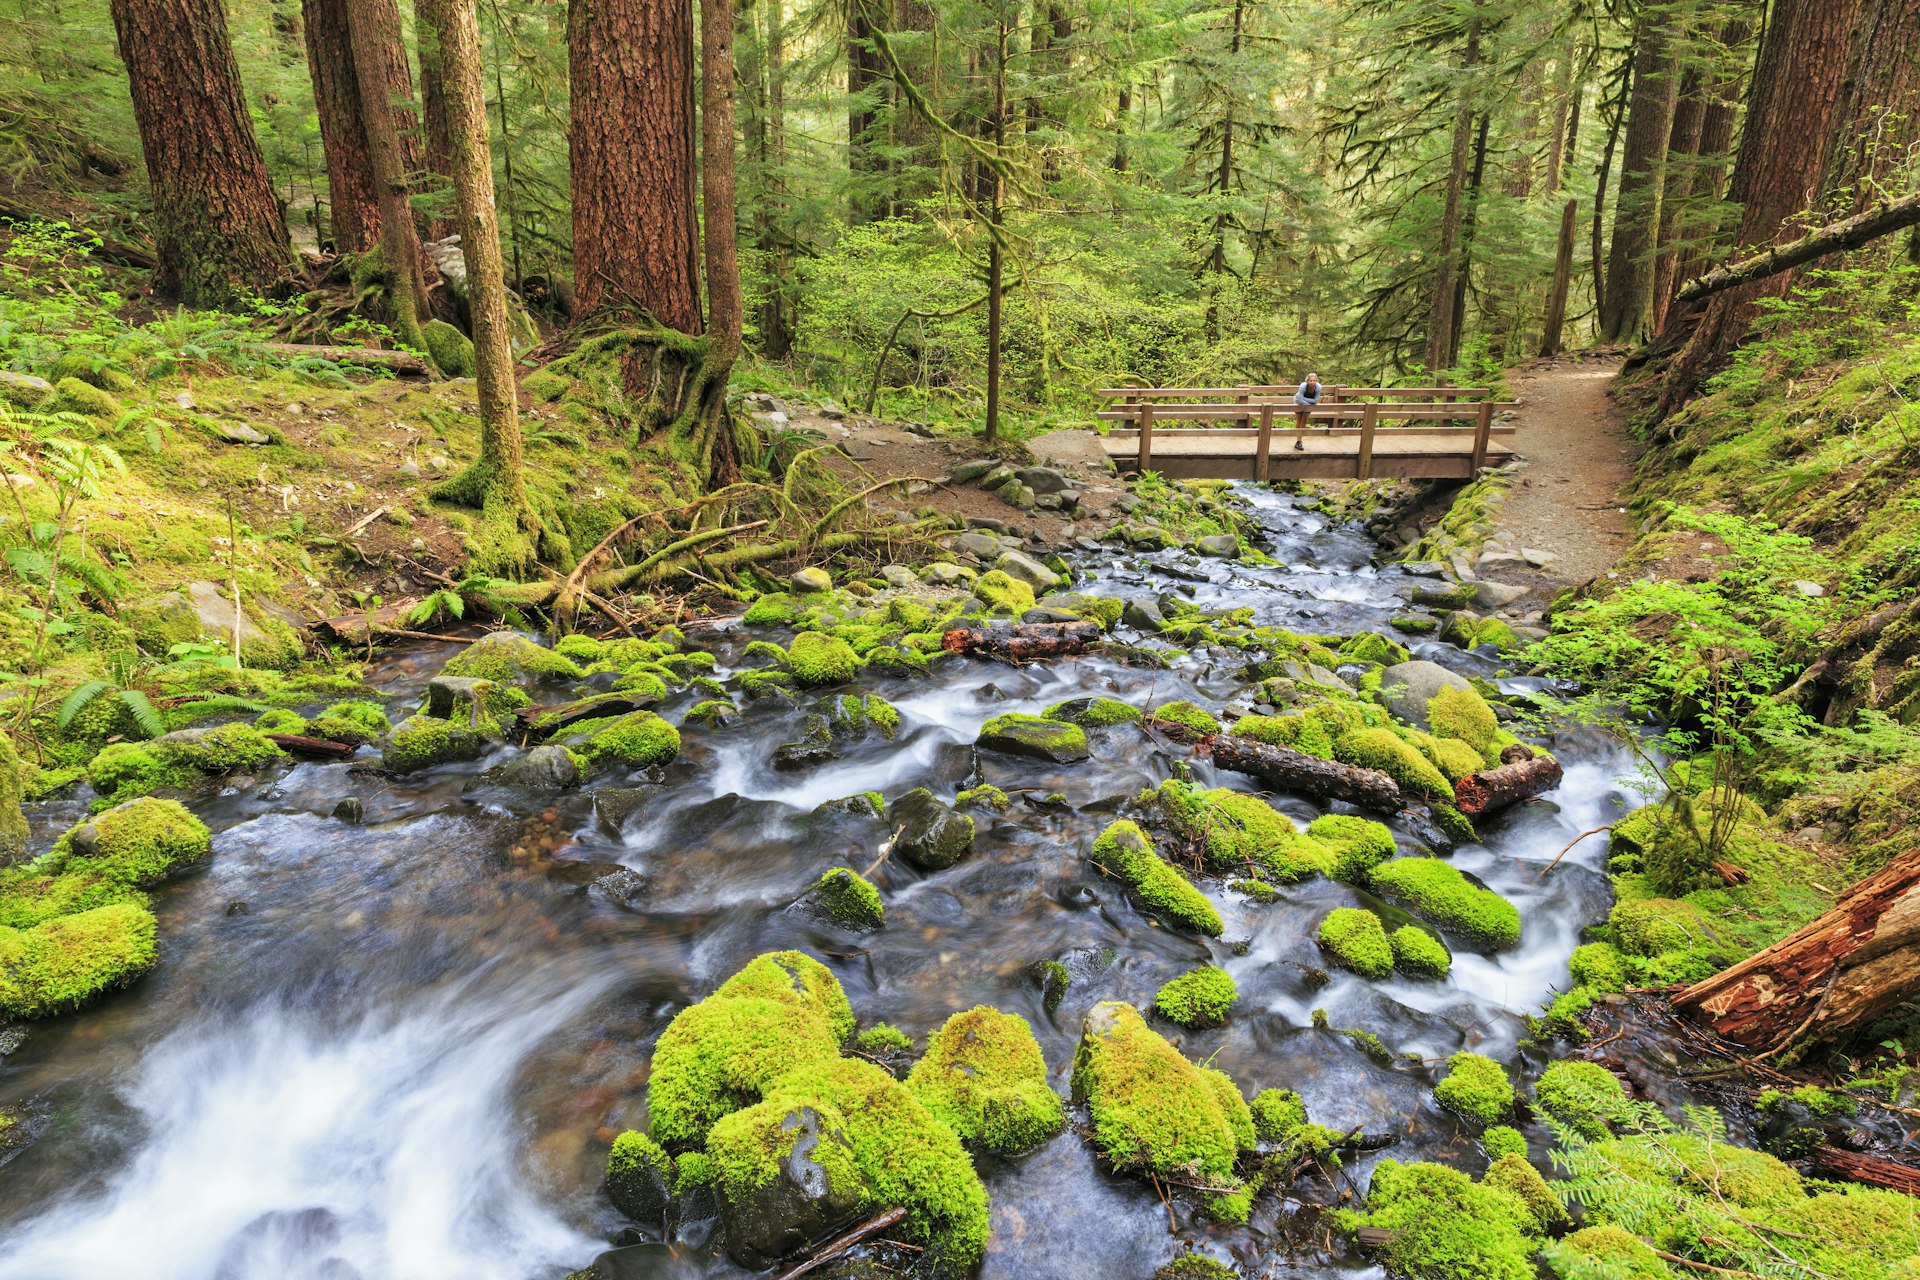 Sol Duc river and wooden bridge in Olympic National Park